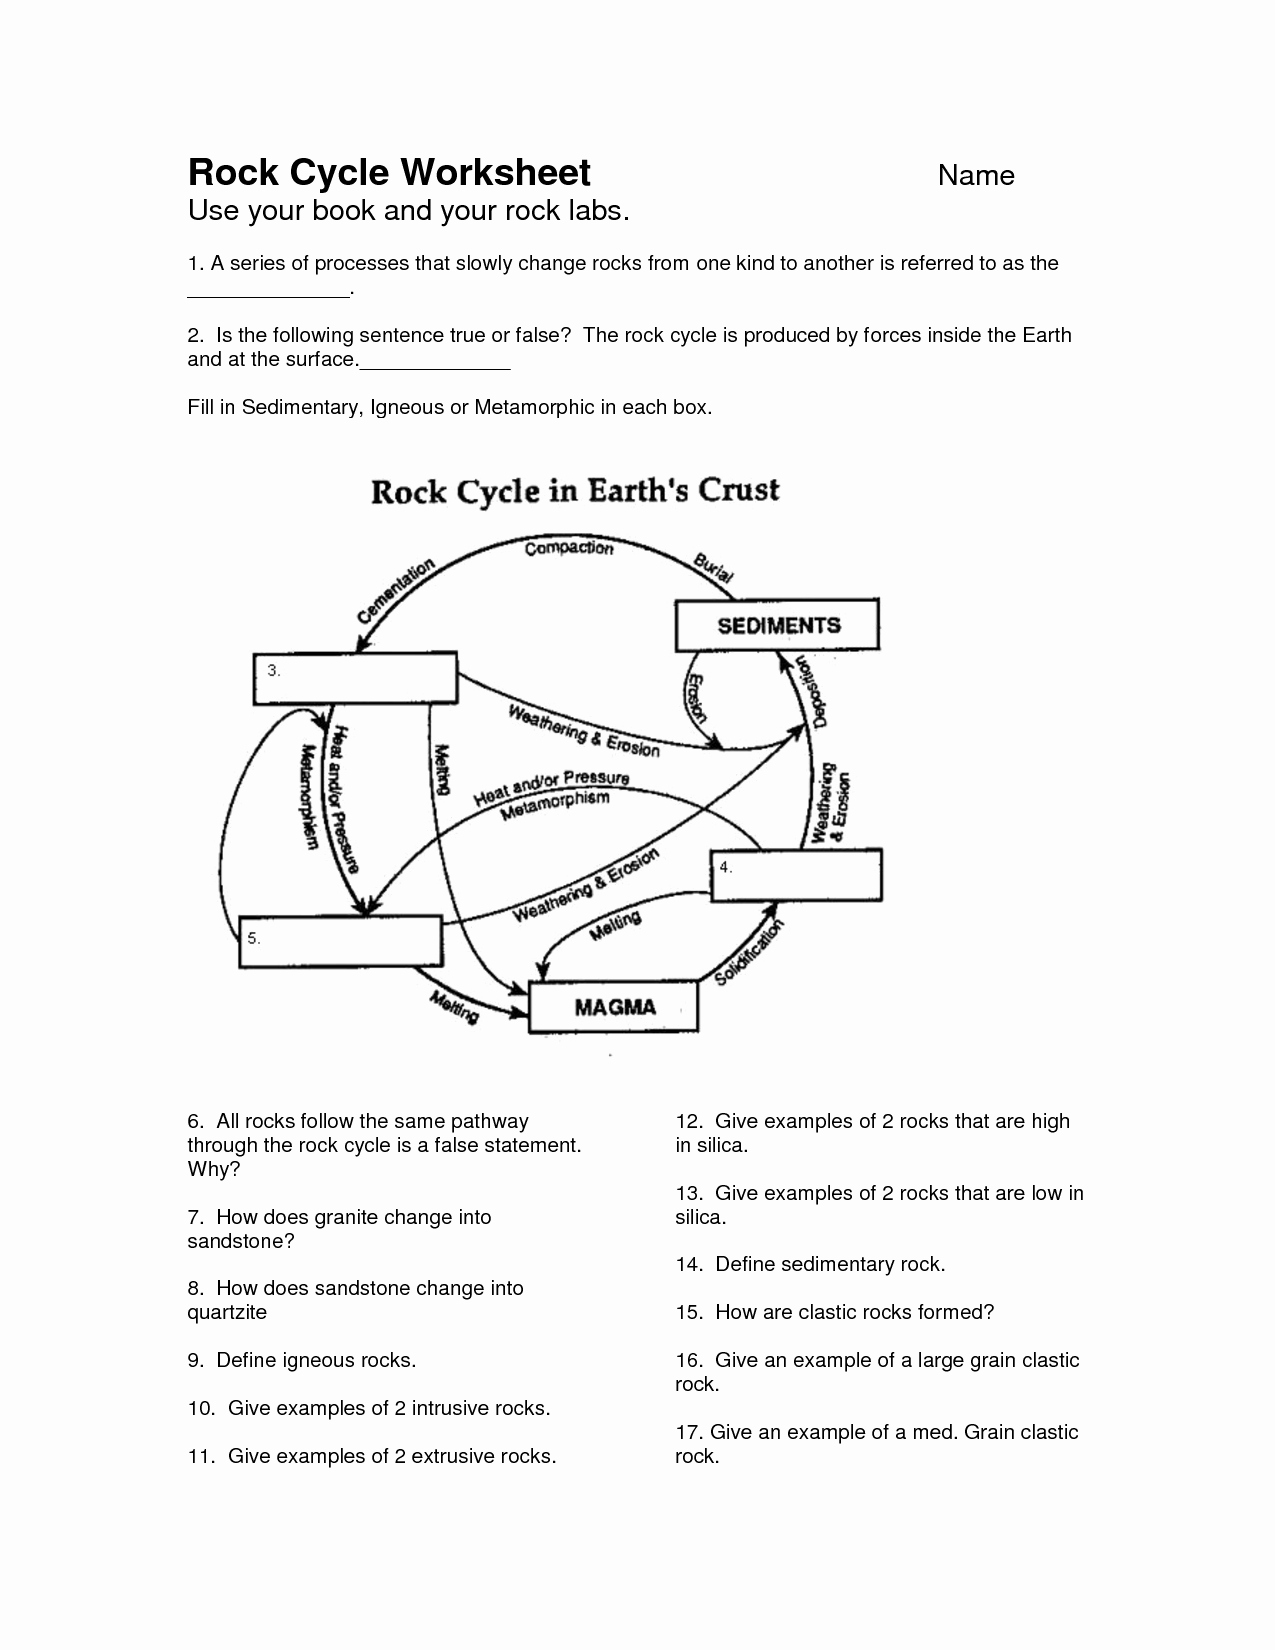 Rock Cycle Worksheet Answers Best Of Rock Cycle Worksheet Google Search